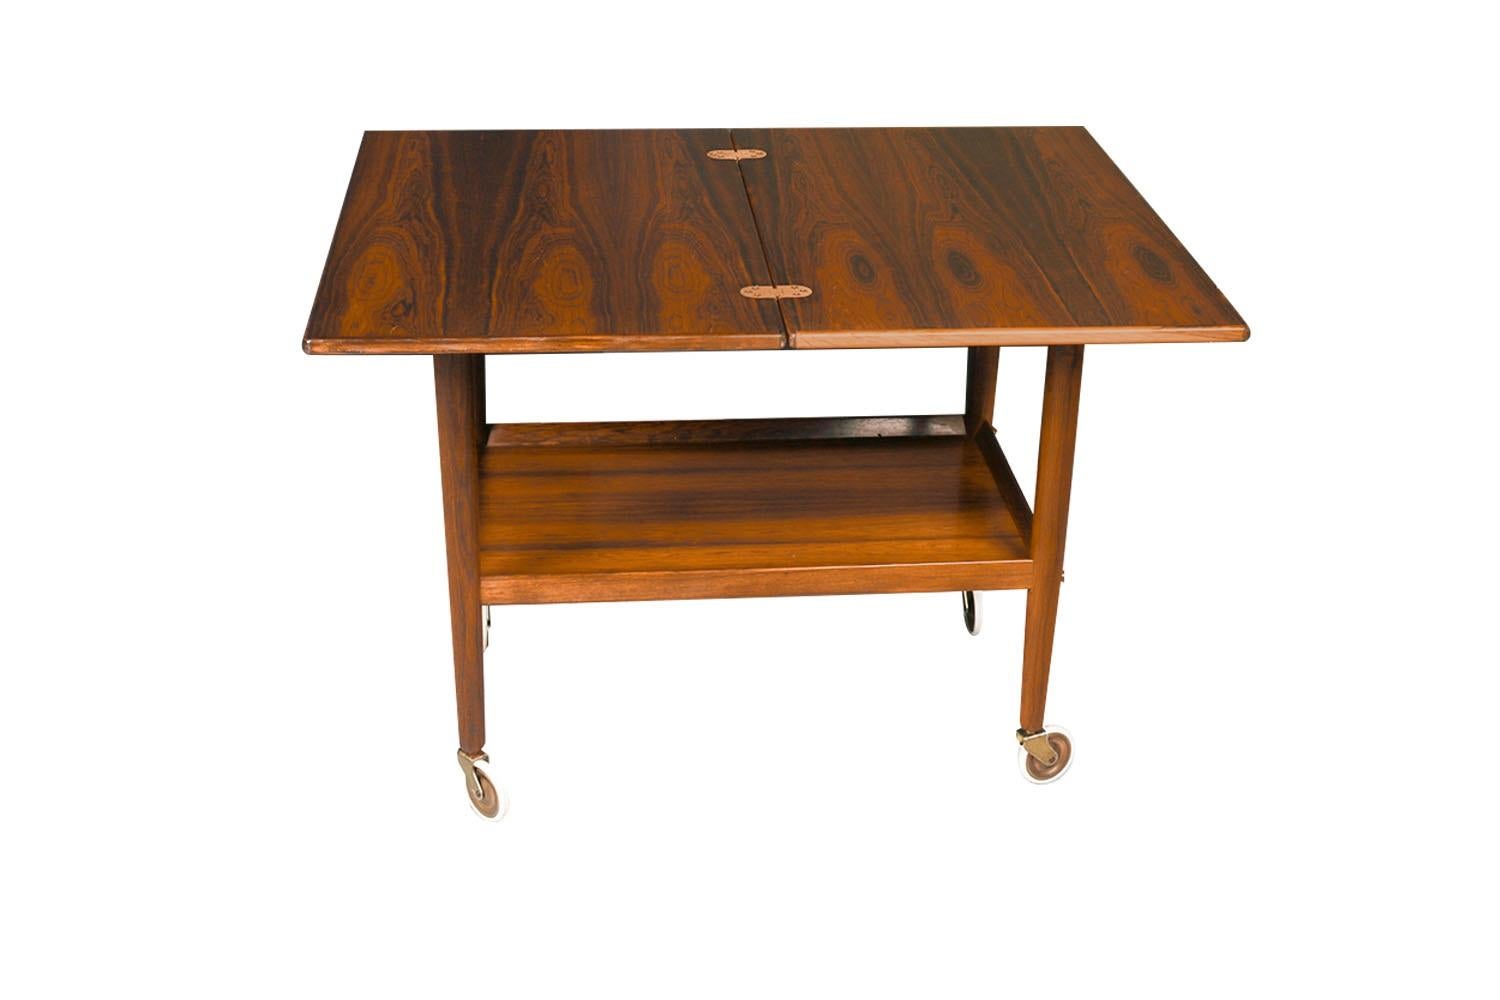 An exceptional Mid-Century Modern serving expandable bar cart by Grete Jalk for Paul Jeppesen Denmark, circa 1960s. Beautifully crafted from rosewood, this cleverly designed piece features a sliding upper top that slides and turns 90 degrees and